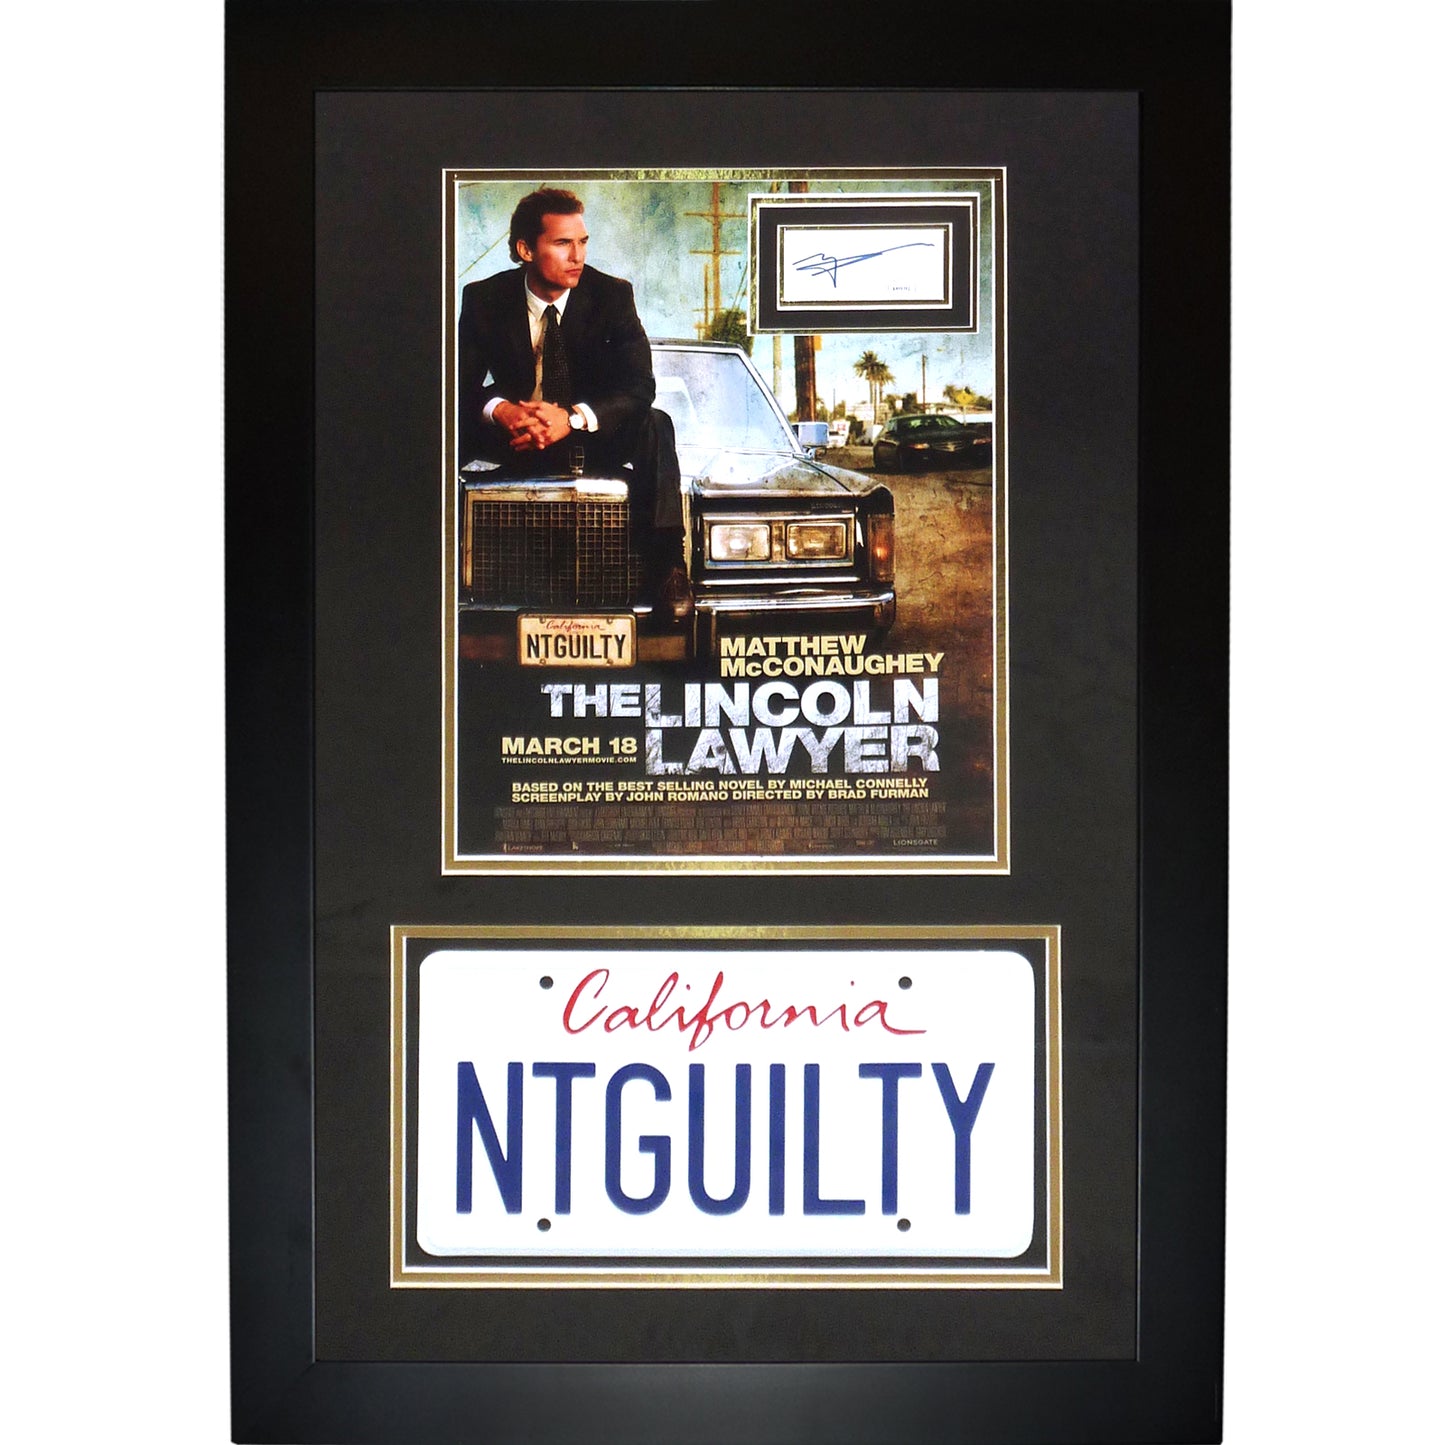 Matthew McConaughey Autographed Lincoln Lawyer Deluxe Framed Piece with 11x17 Movie Poster and NTGUILTY License Plate - JSA